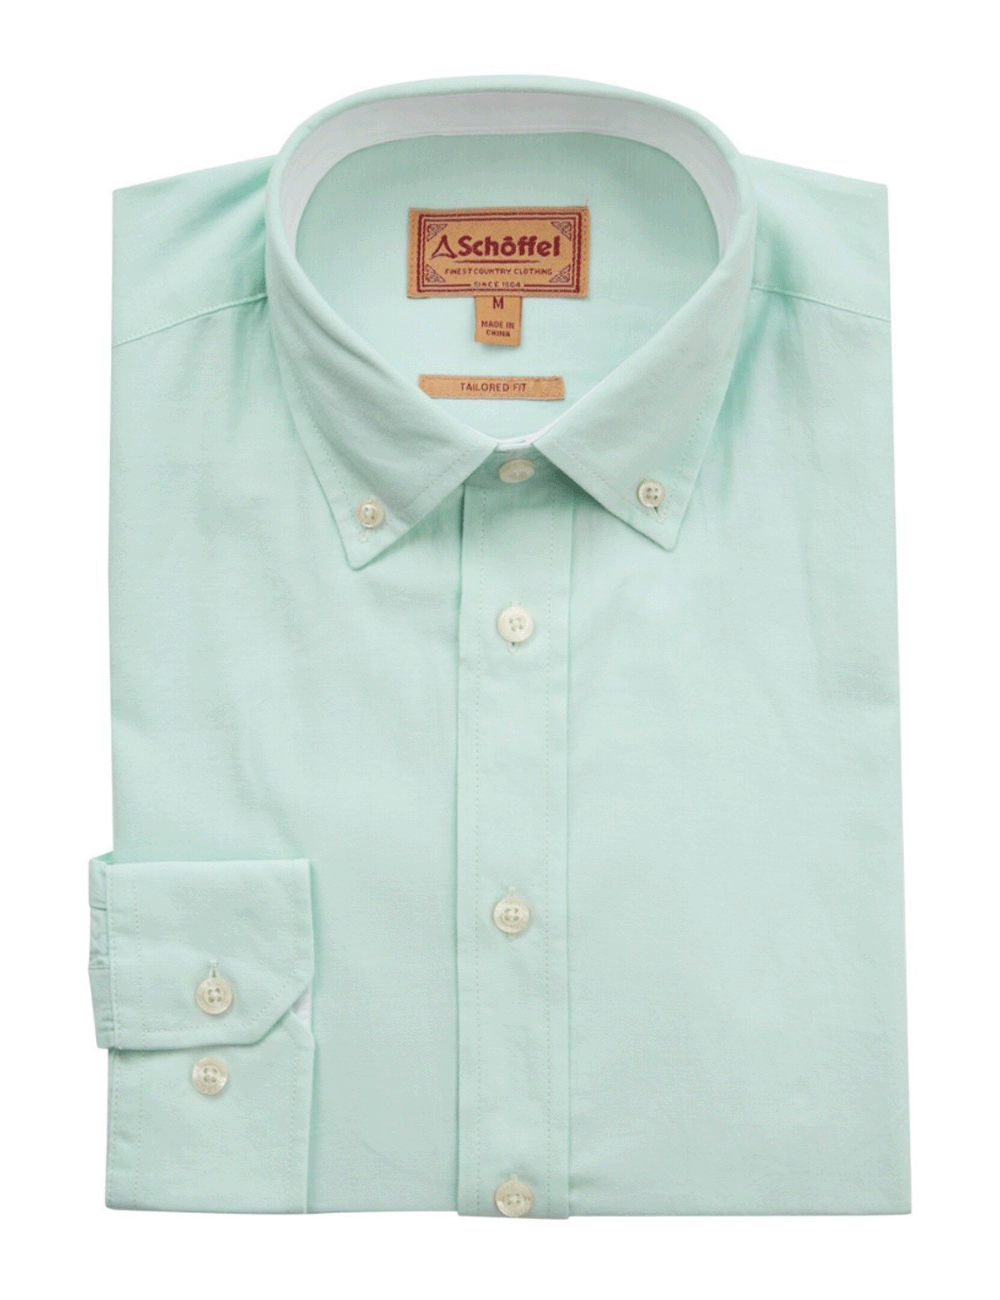 Schoffel's Titchwell Shirt in Pale Mint folded on a white background